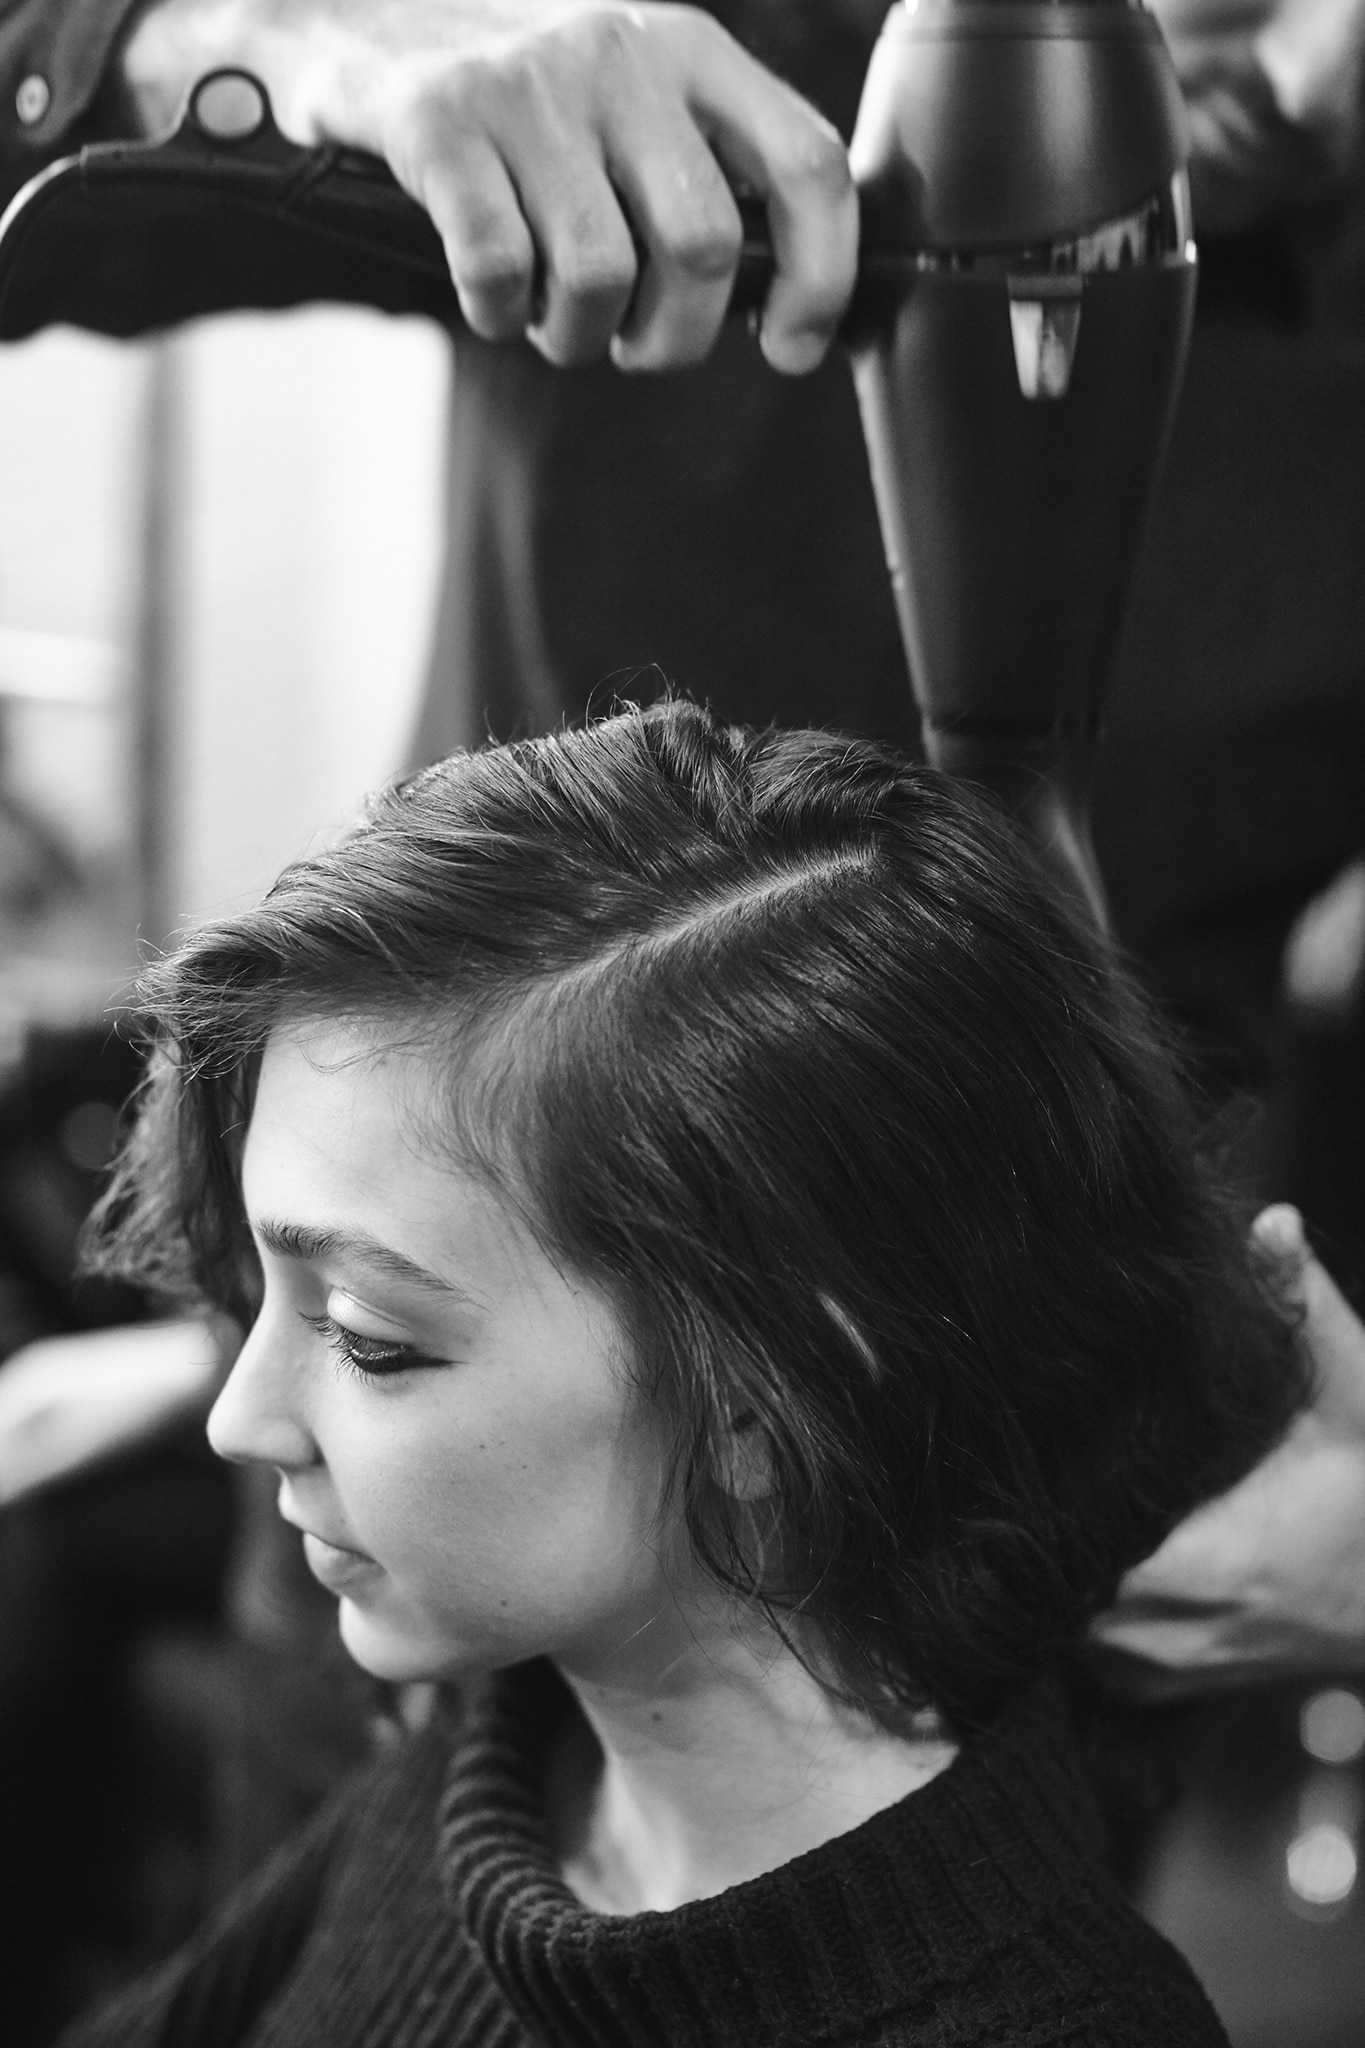 A model seated with her hair in a parting and a stylist holding her hair and a blow dryer